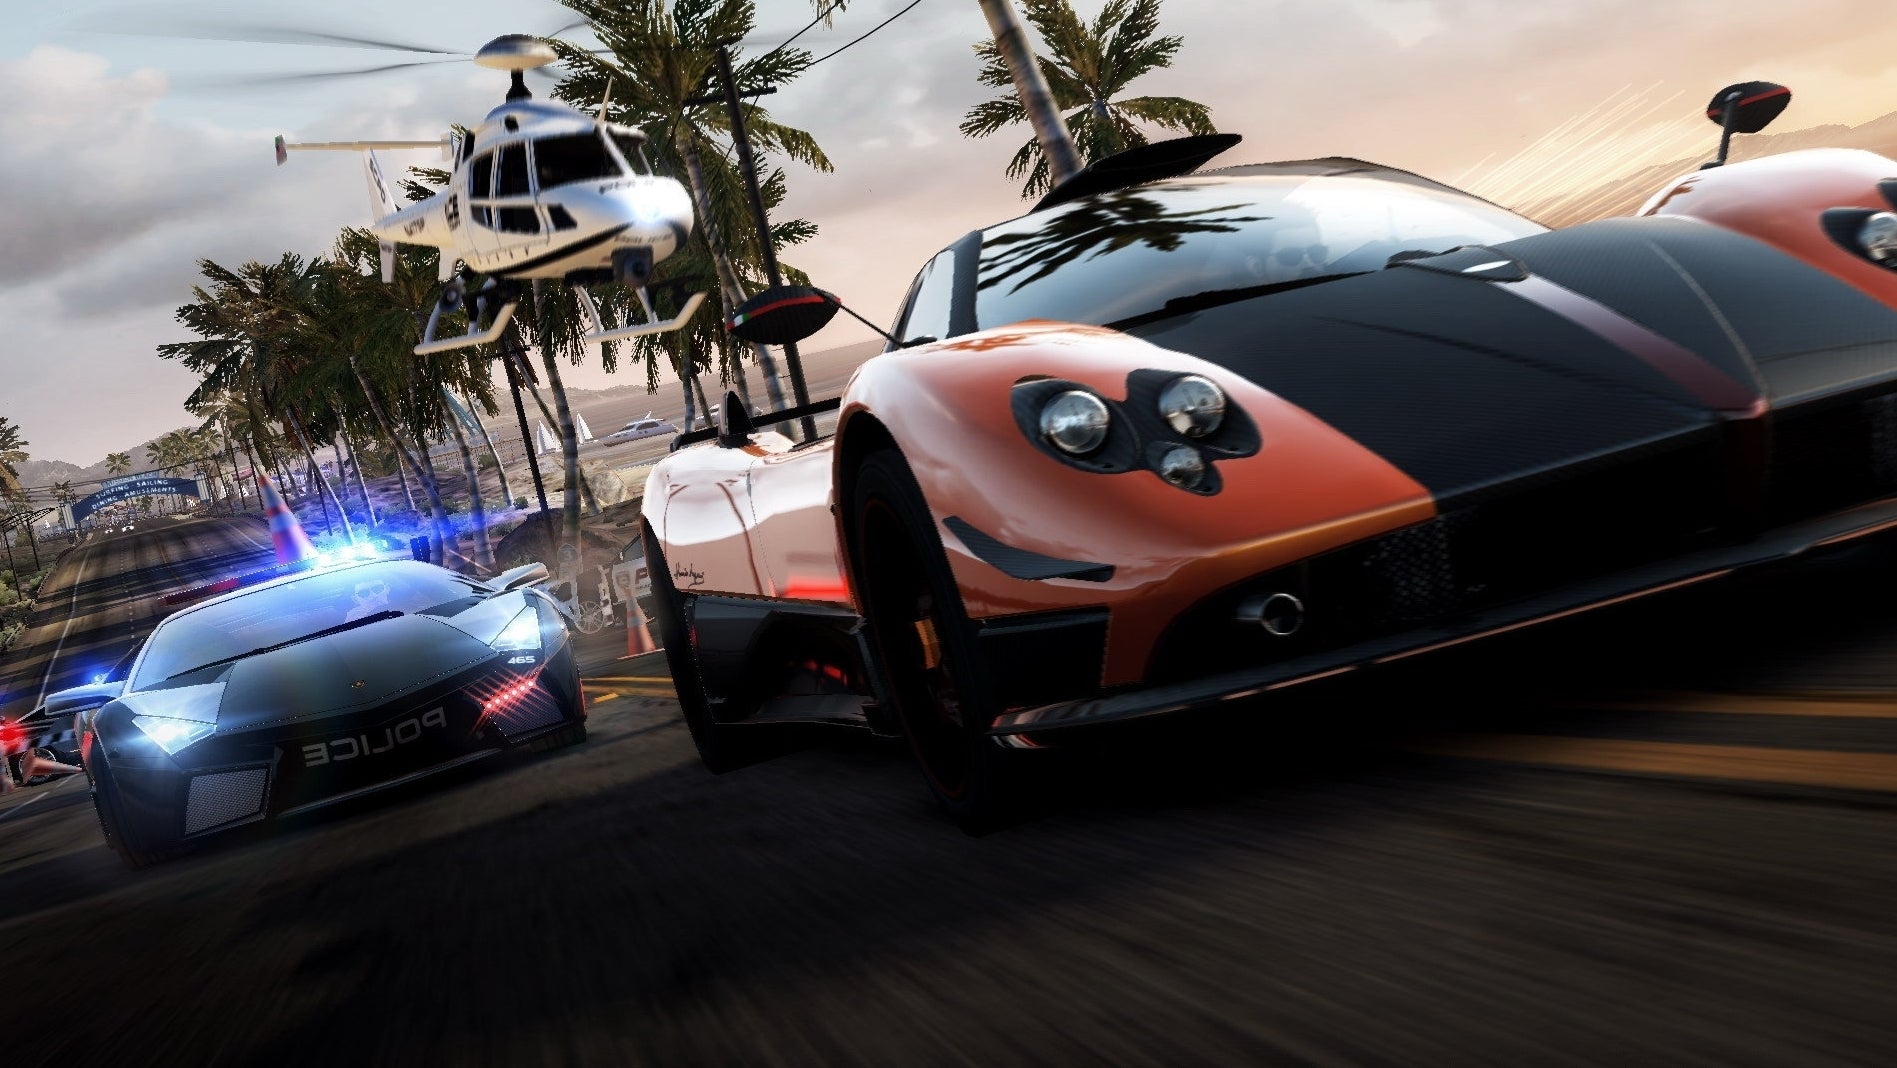 Image for Need for Speed: Hot Pursuit is getting a remaster - report